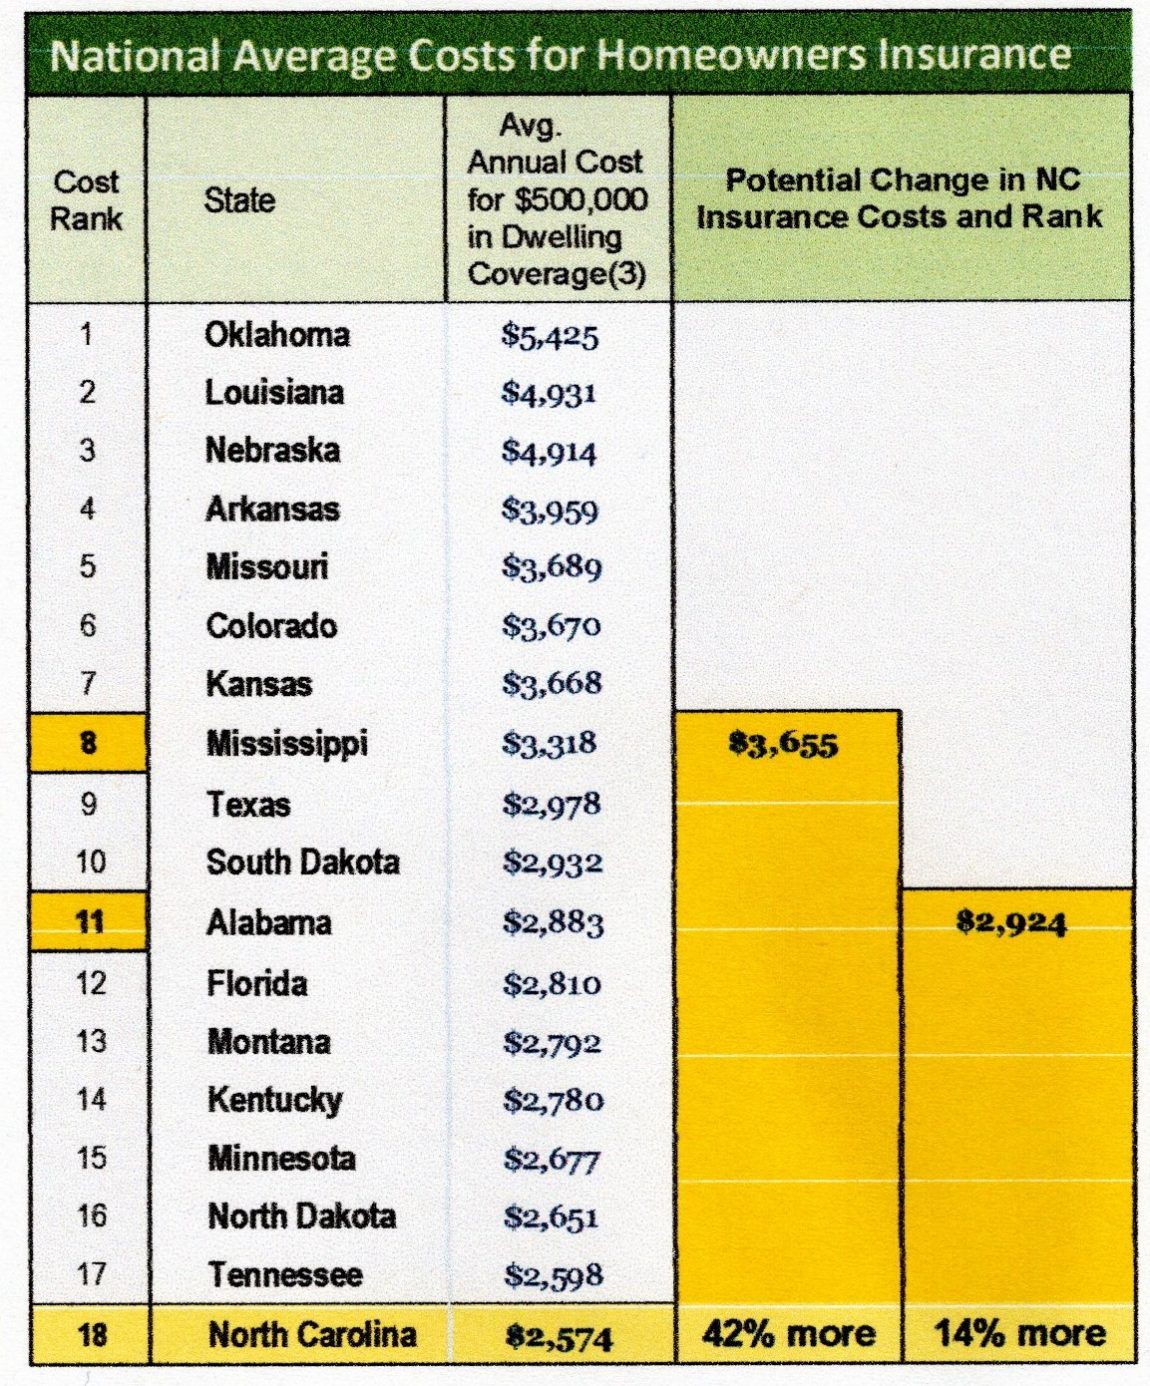 A table showing the national average costs for homeowners insurance, and the potential change in costs and rankings for North Carolina based on proposed rate increases by the NC Rate Board, Jan. 3, 2024.